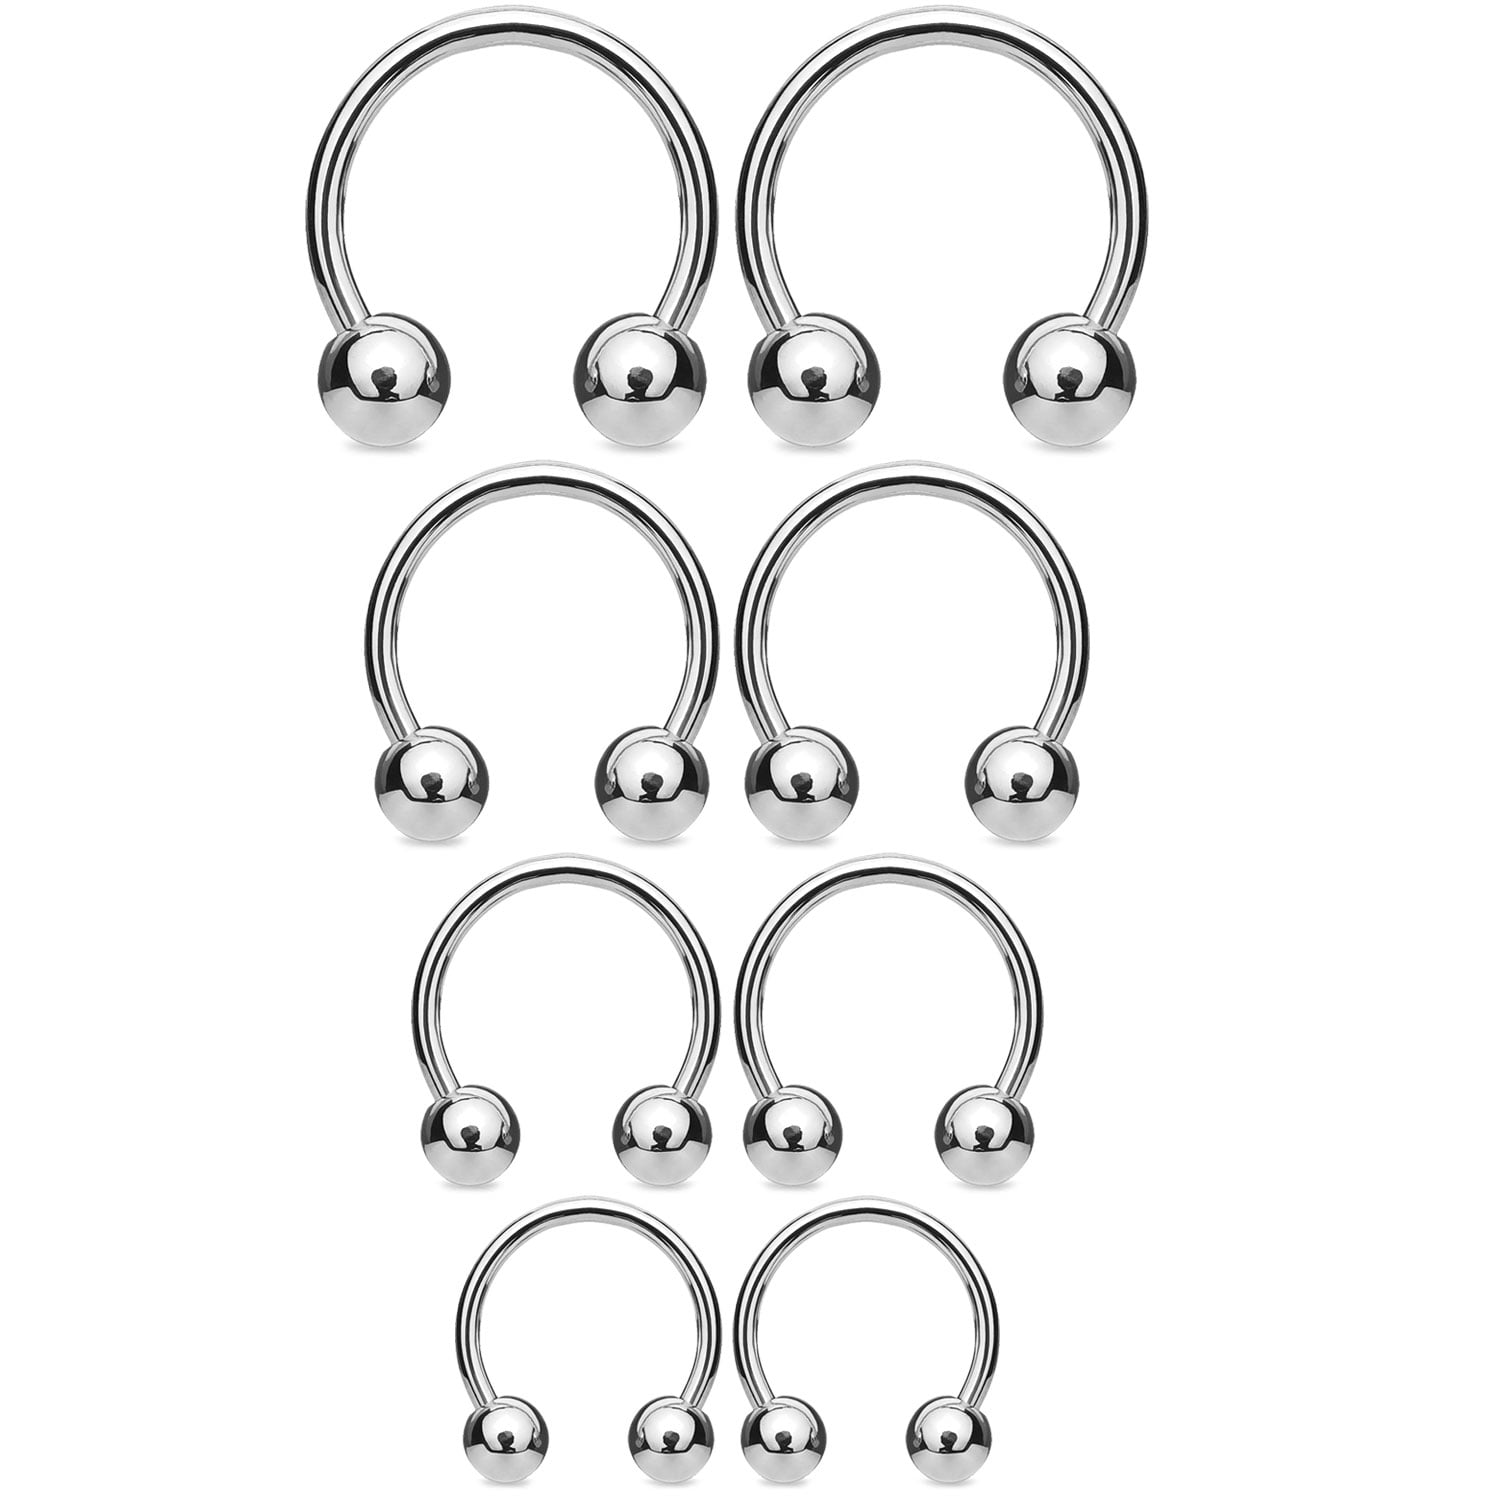 septum 3 different lengths in Rainbow Captive bead Ring lip tragus earring hoop cartilage 14g nipple belly 18g, 16g, or 14g